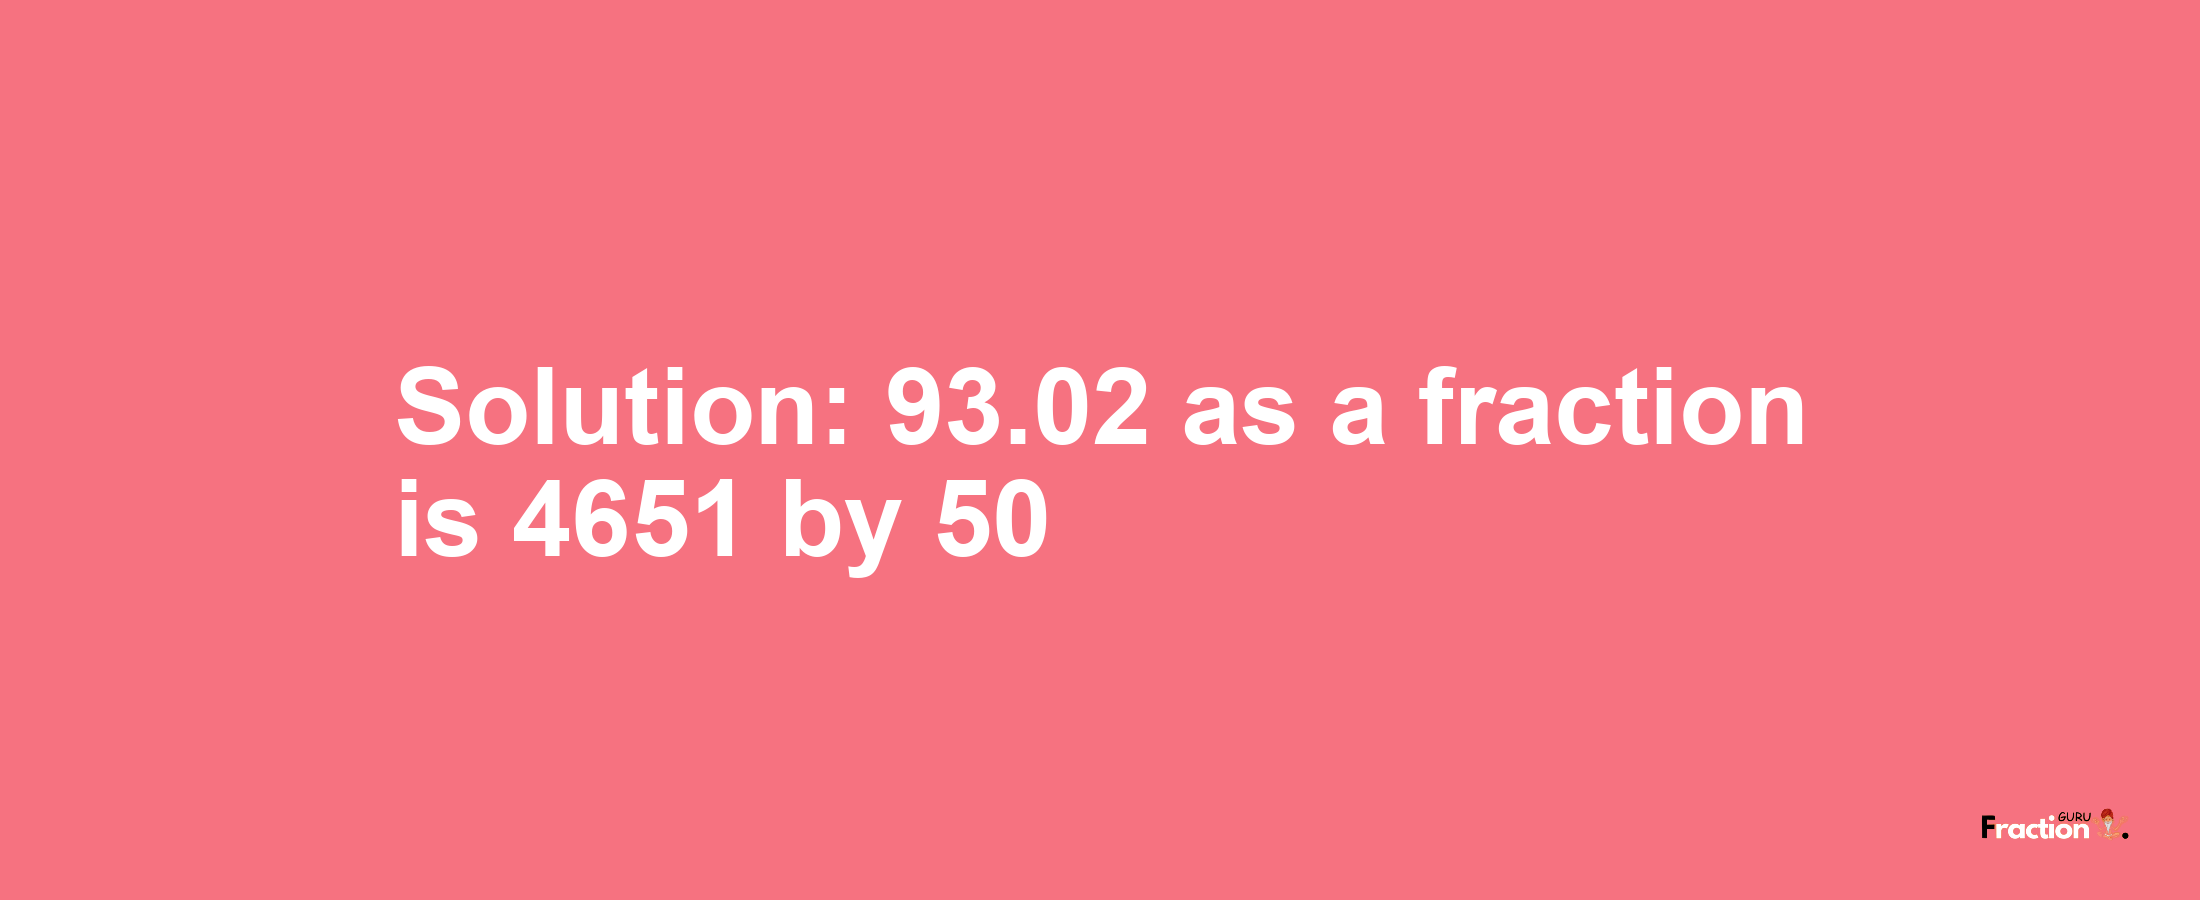 Solution:93.02 as a fraction is 4651/50